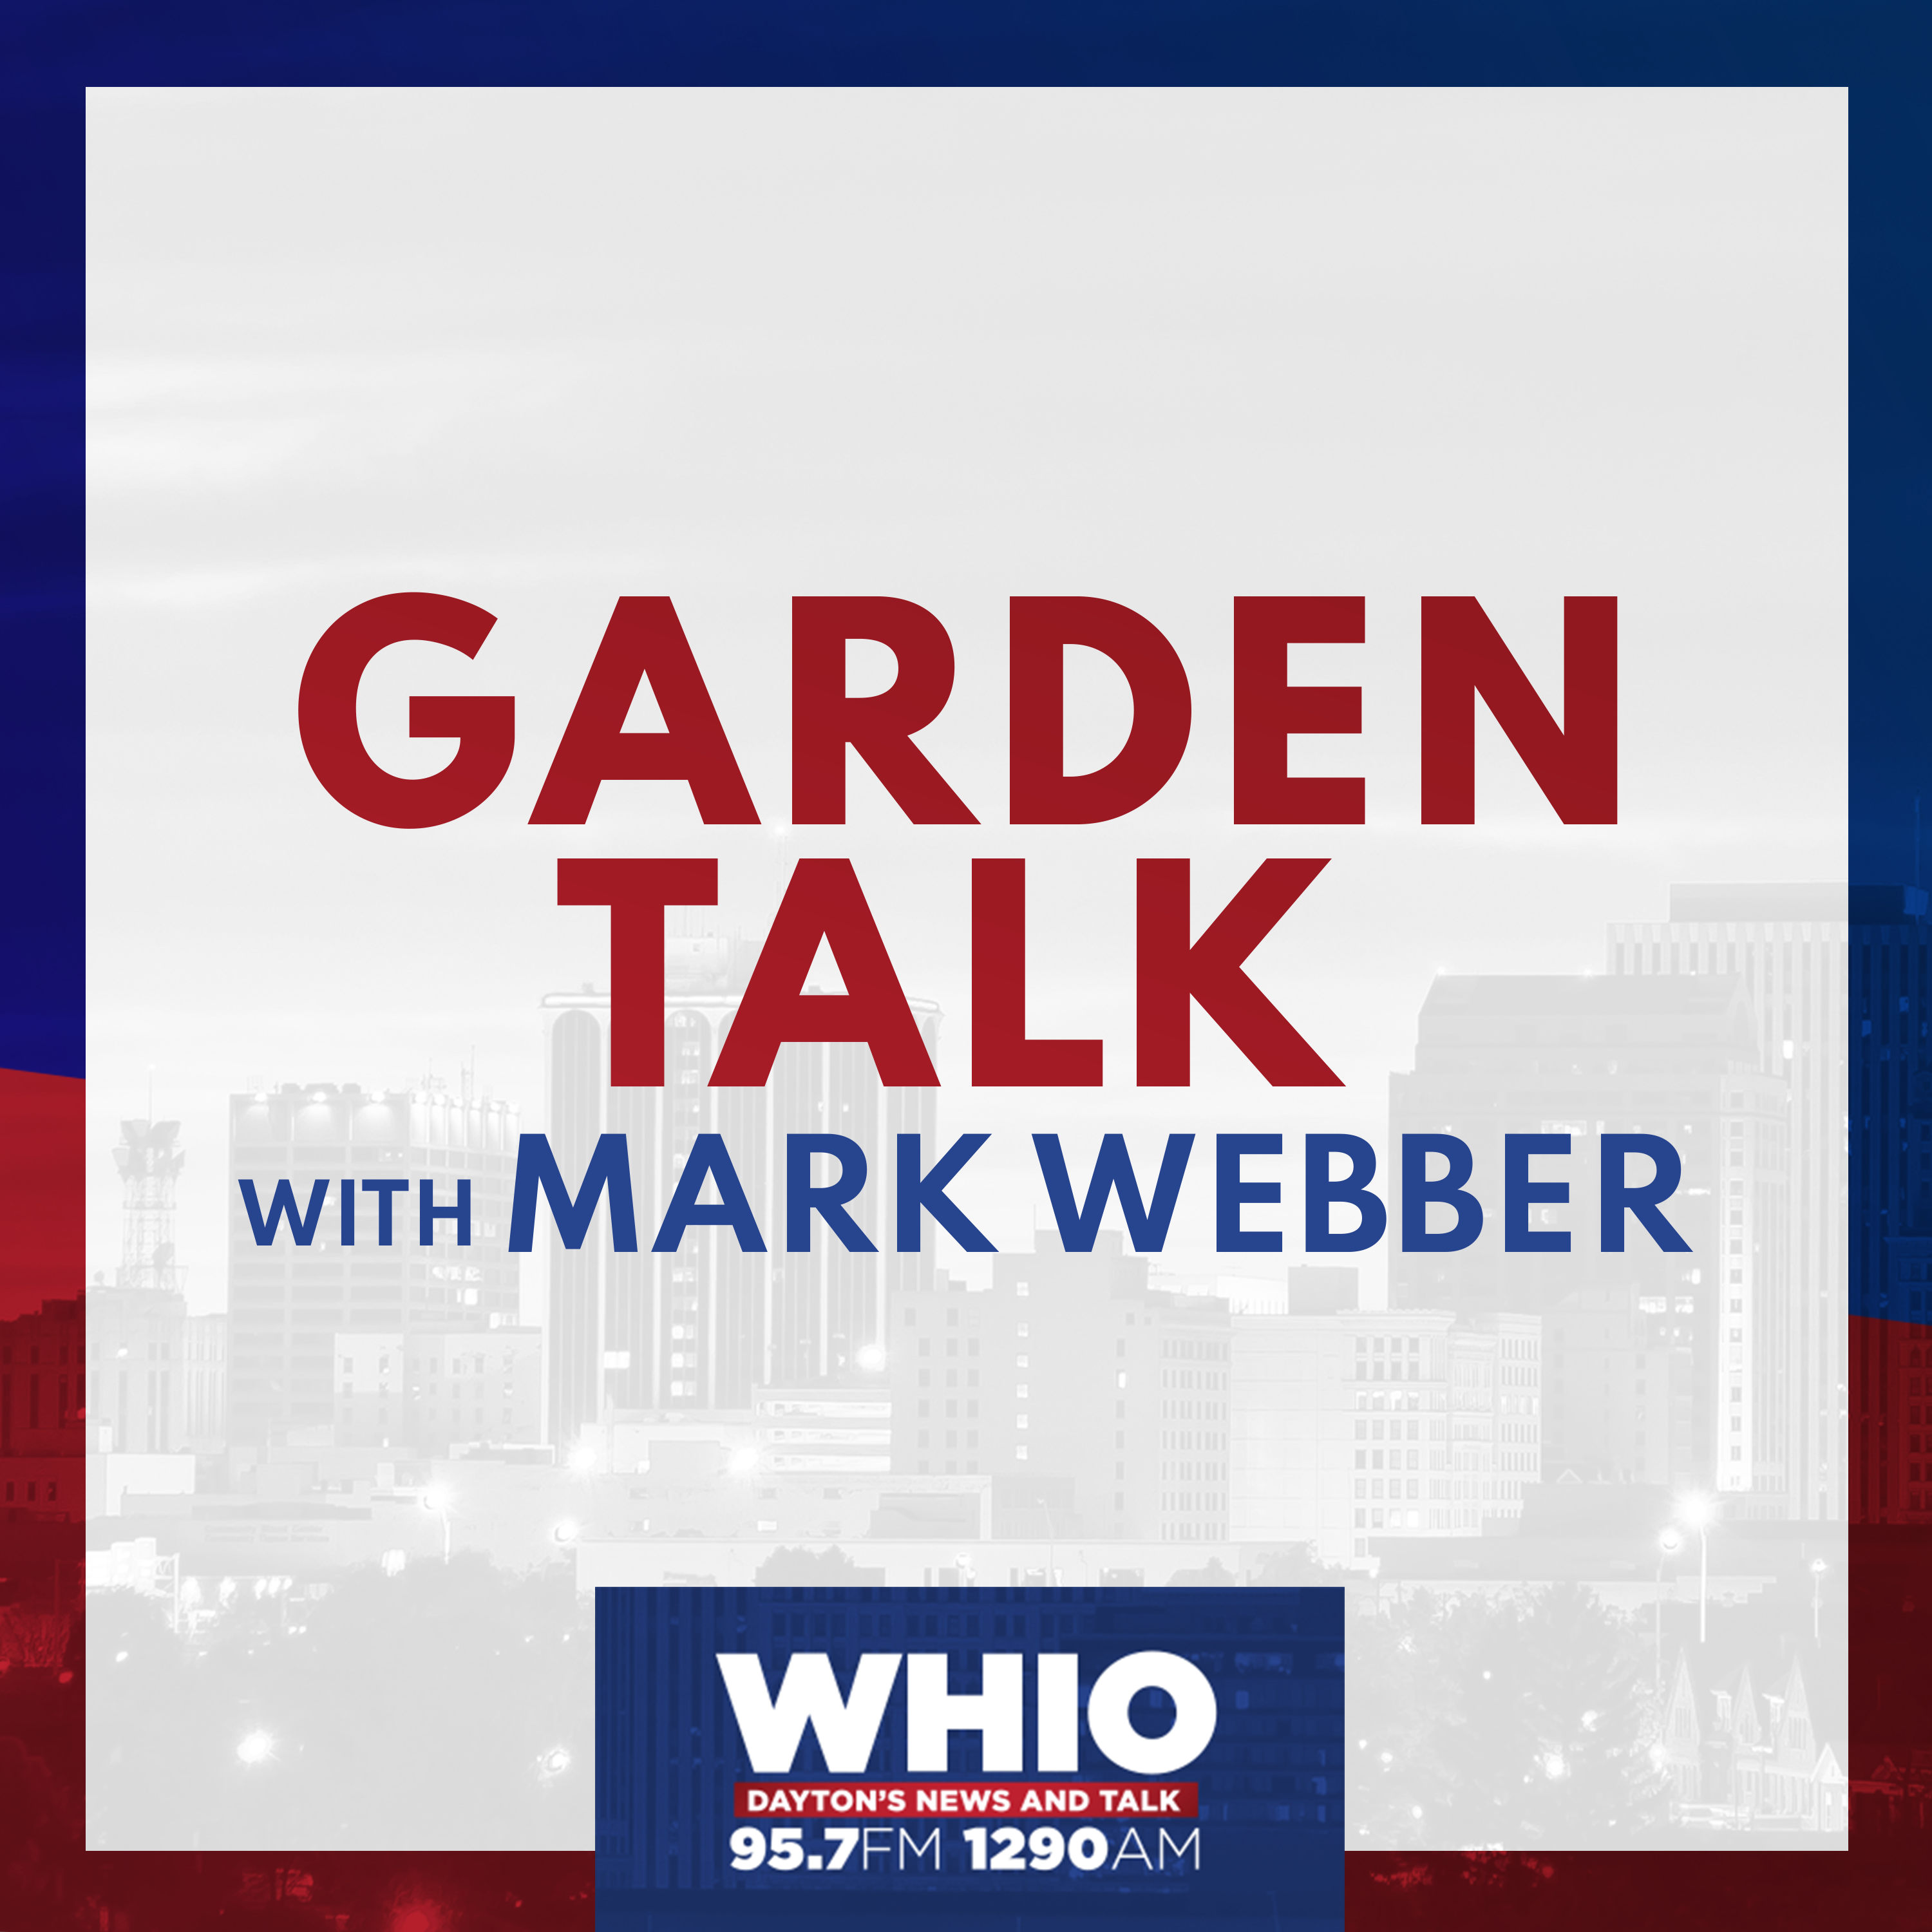 Garden Talk with Mark Webber: Hour 1 from Saturday, June 13th, 2015